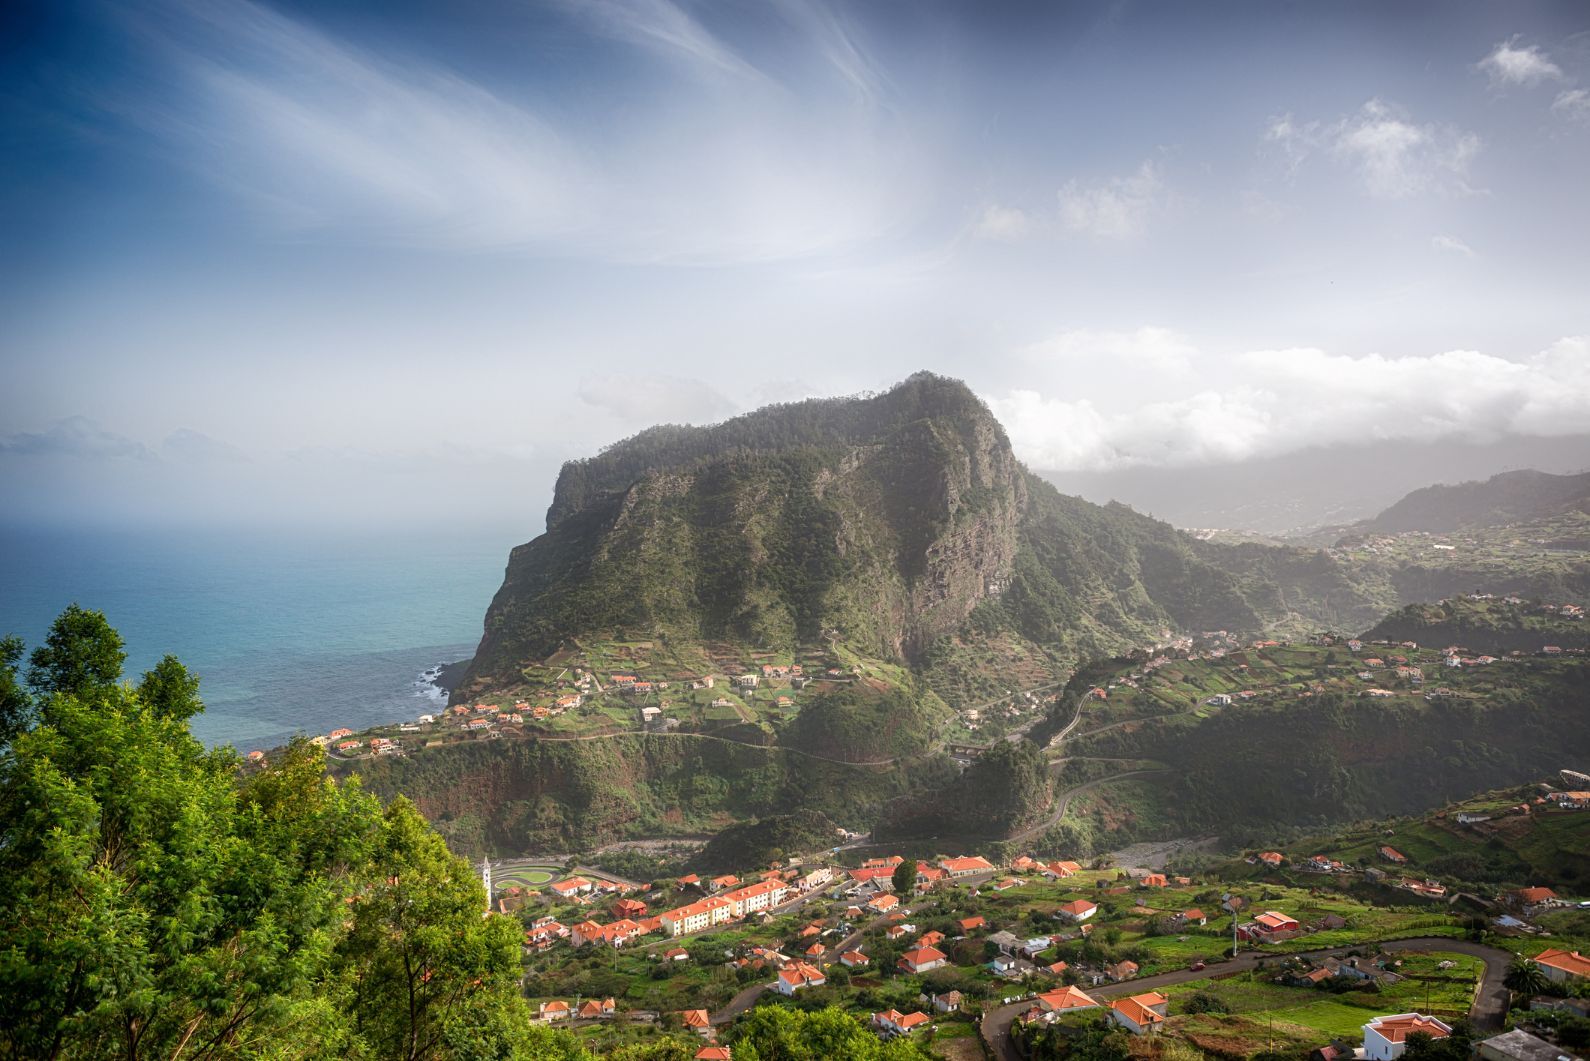 Eagle Rock, a flat-topped mountain in Madeira